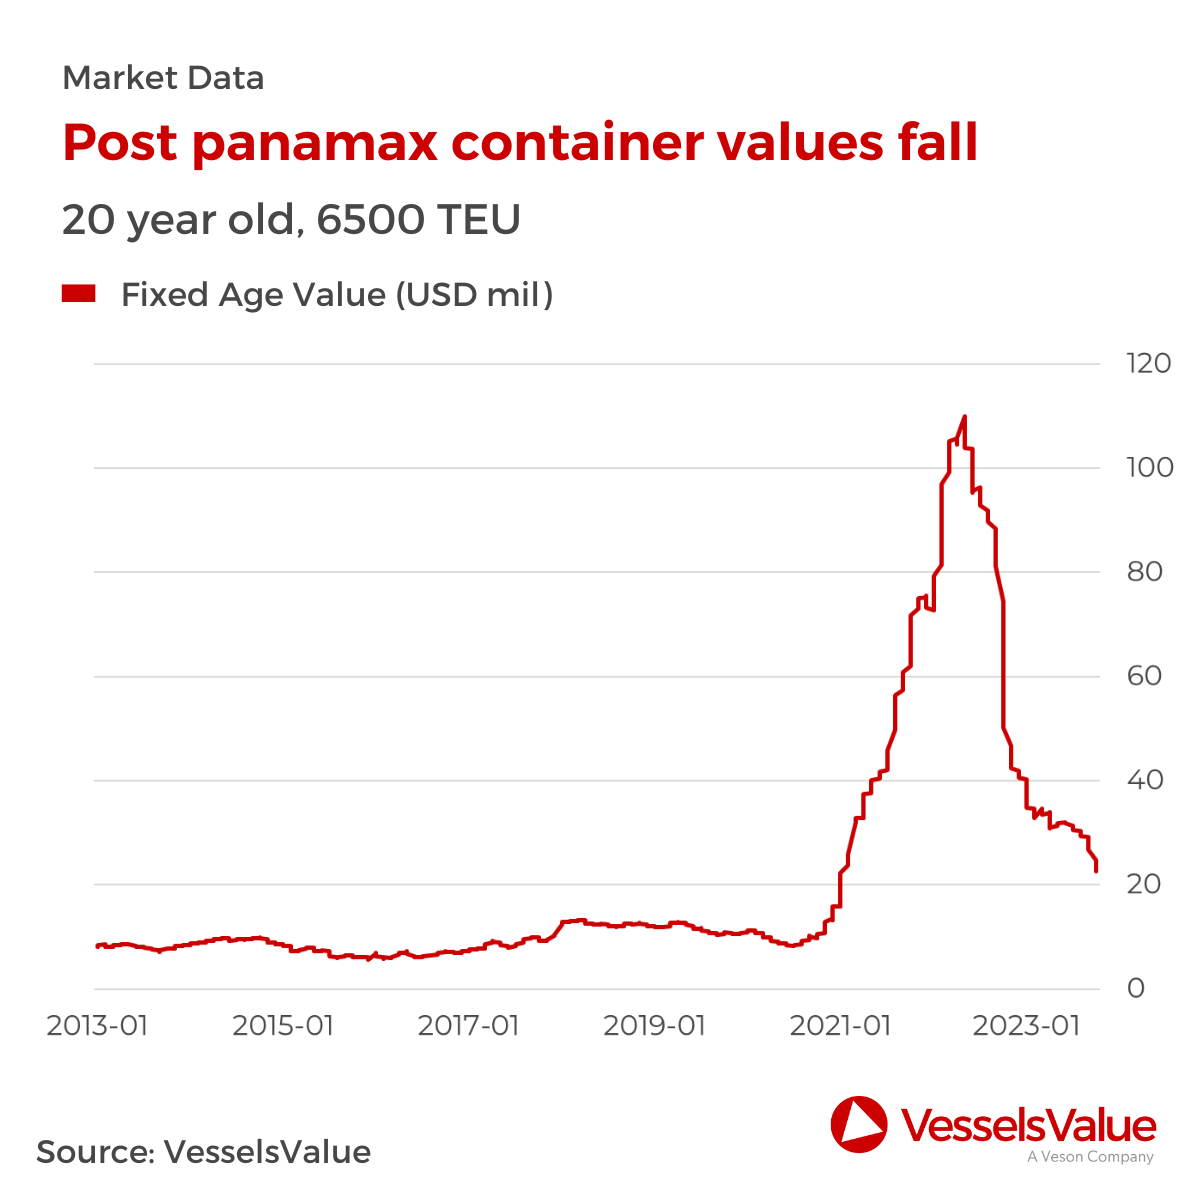 Container values and earnings fall to the lowest levels